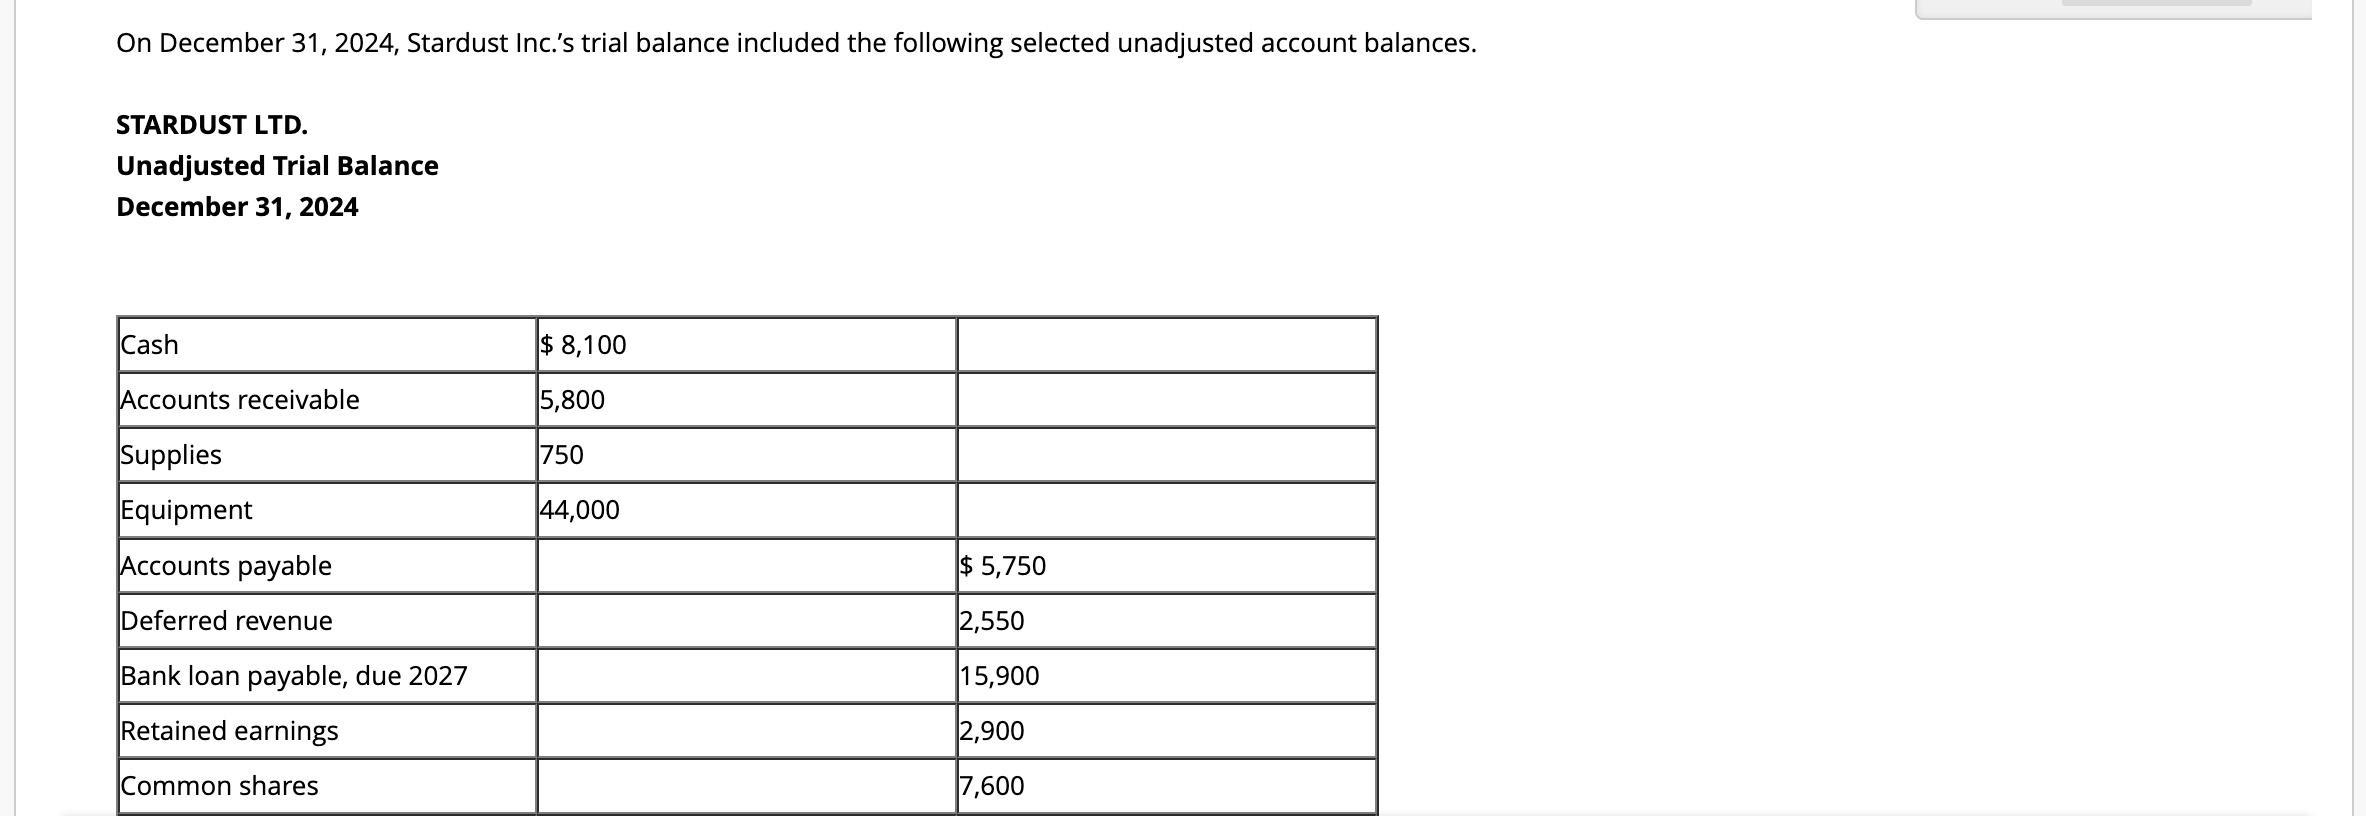 On December 31, 2024, Stardust Inc.s trial balance included the following selected unadjusted account balances. STARDUST LTD